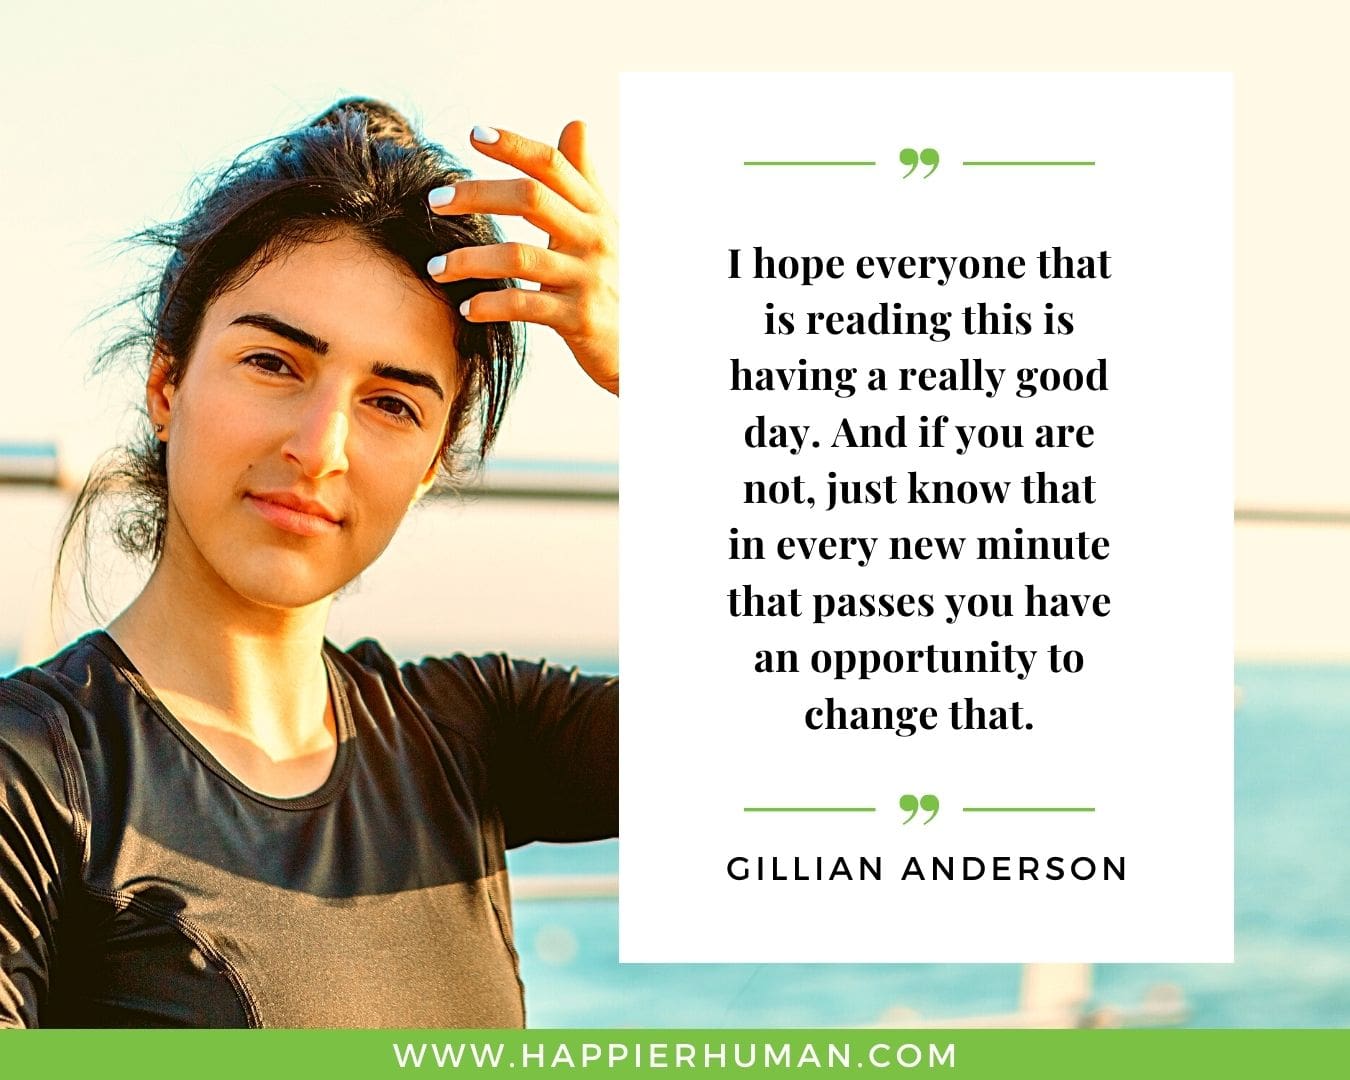 Great Day Quotes - “I hope everyone that is reading this is having a really good day. And if you are not, just know that in every new minute that passes you have an opportunity to change that.” – Gillian Anderson